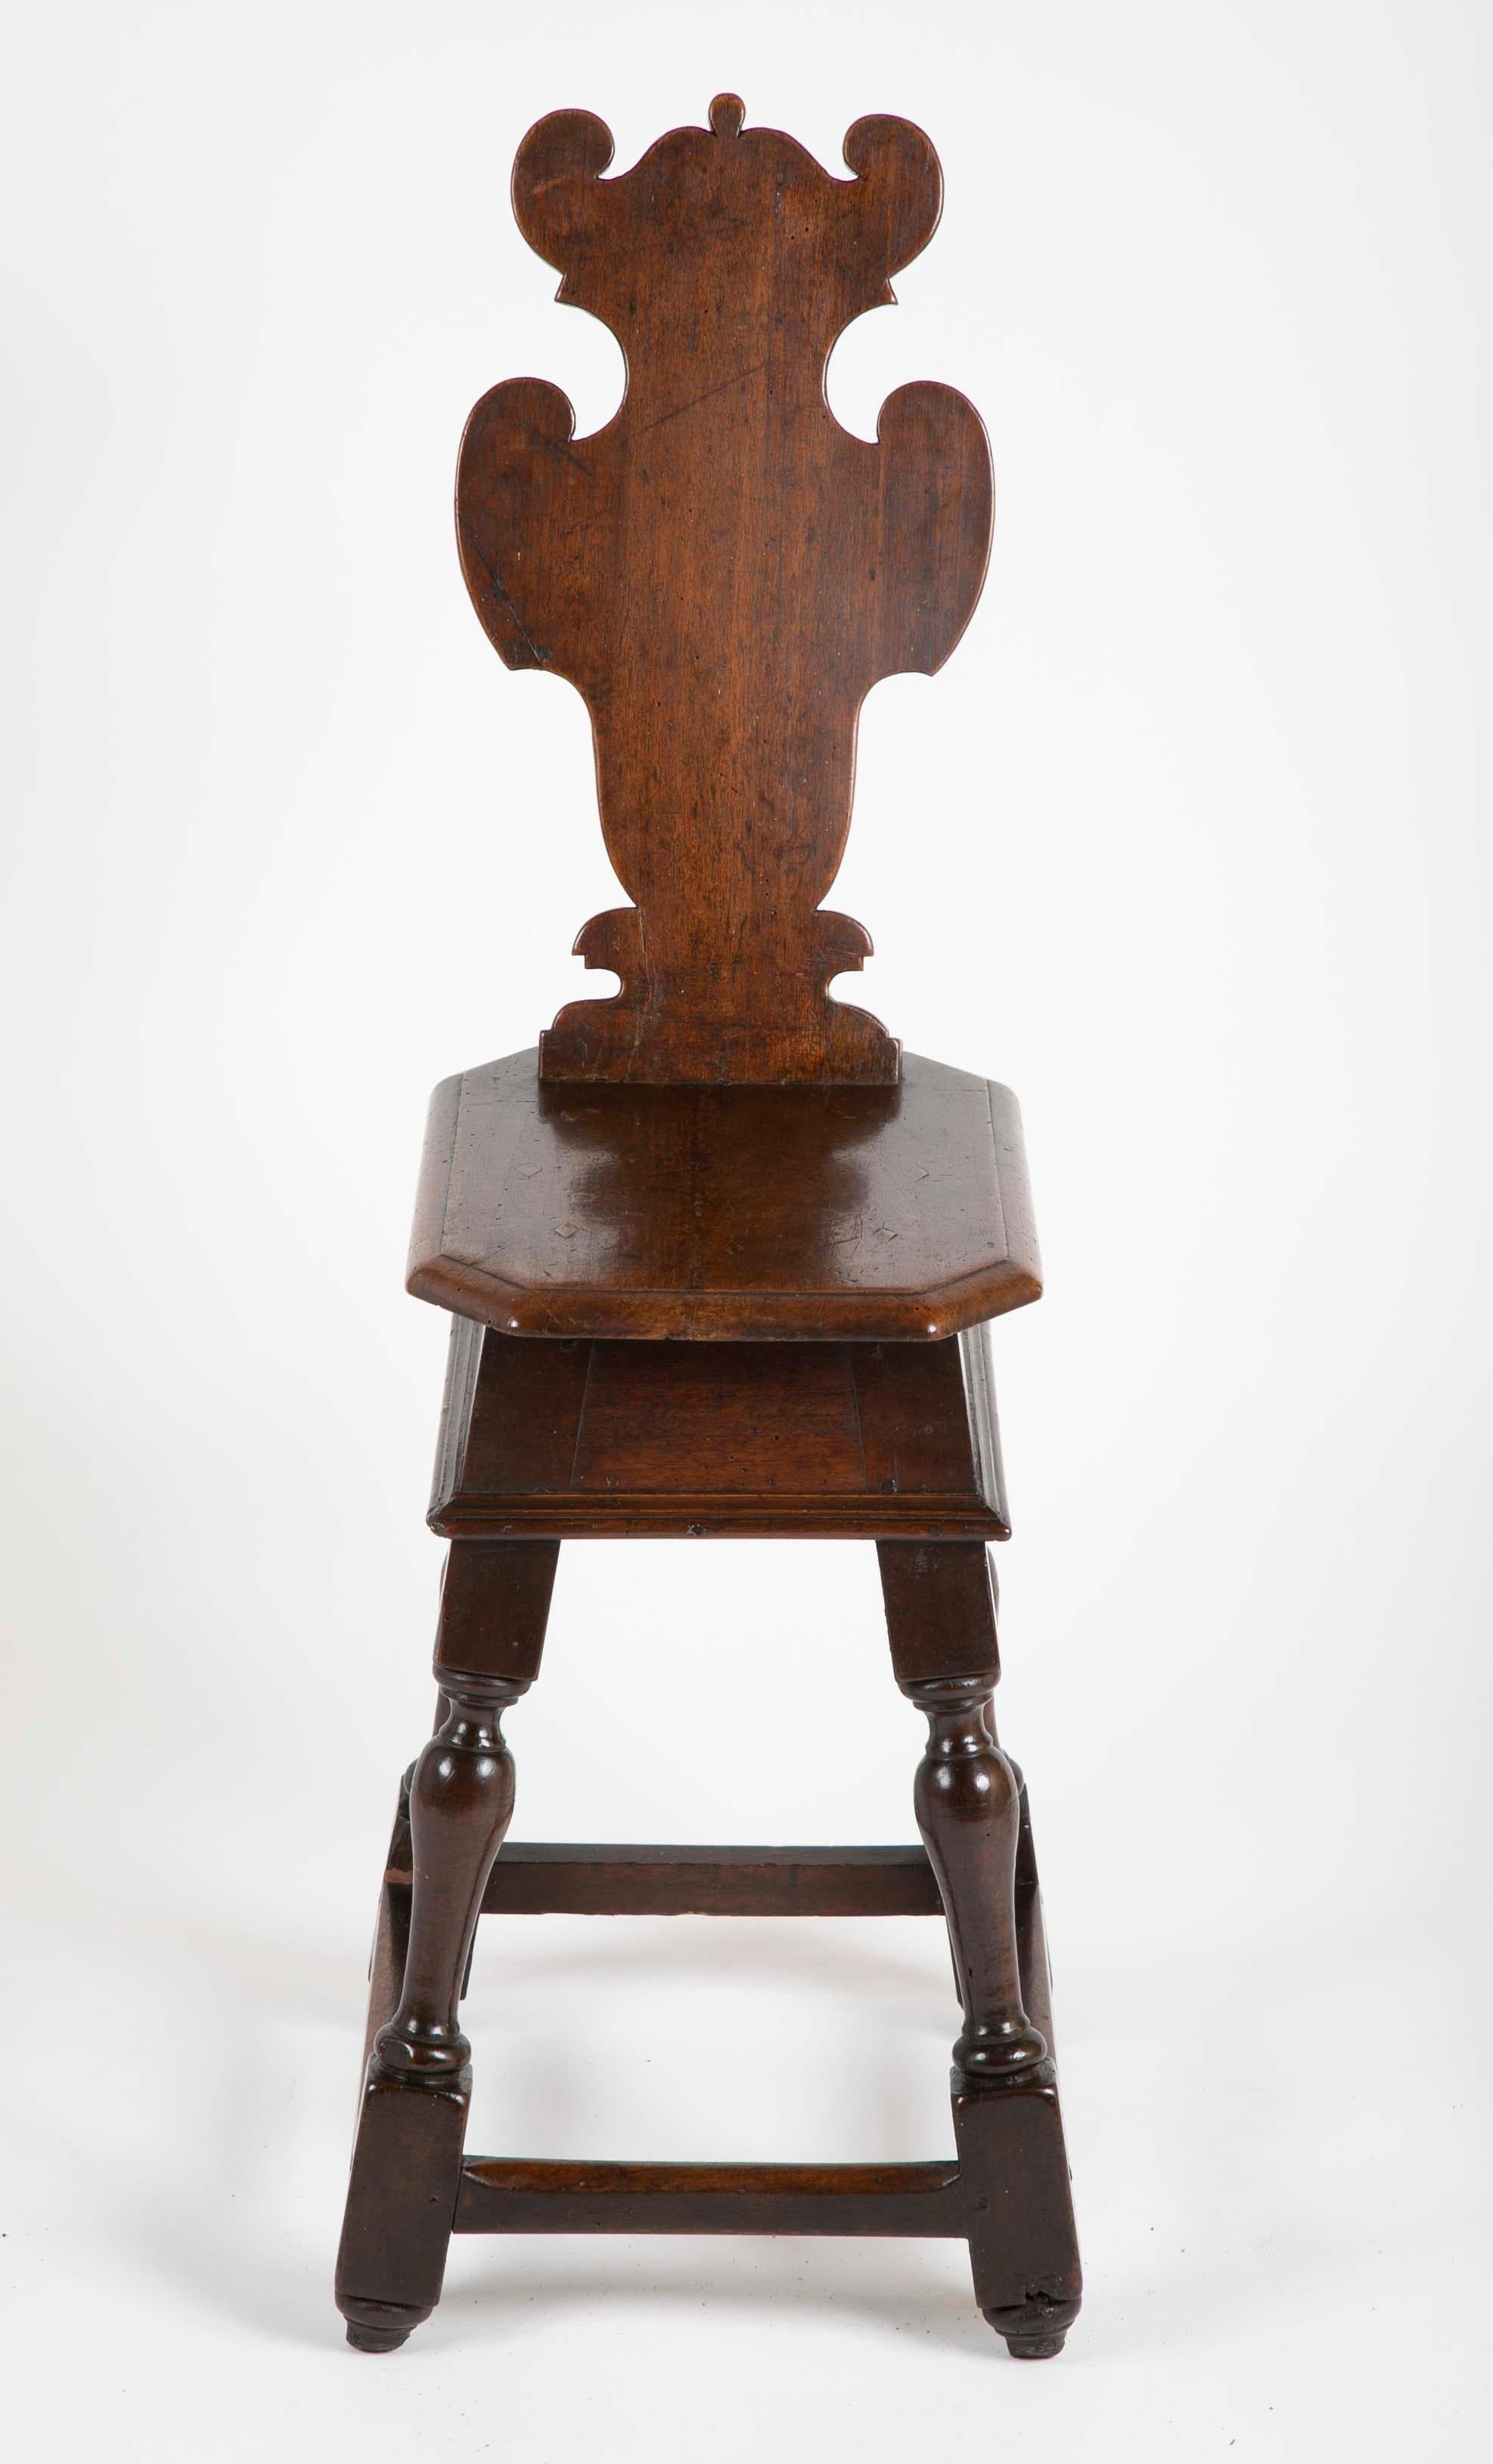 A late 16th-early 17th century walnut sgabello, or hall chair with a cartouche shaped back over an octagonal seat above scrolled supports. This is the Classic late Renaissance, early Baroque form of a hall or occasional chair, really a stool with a